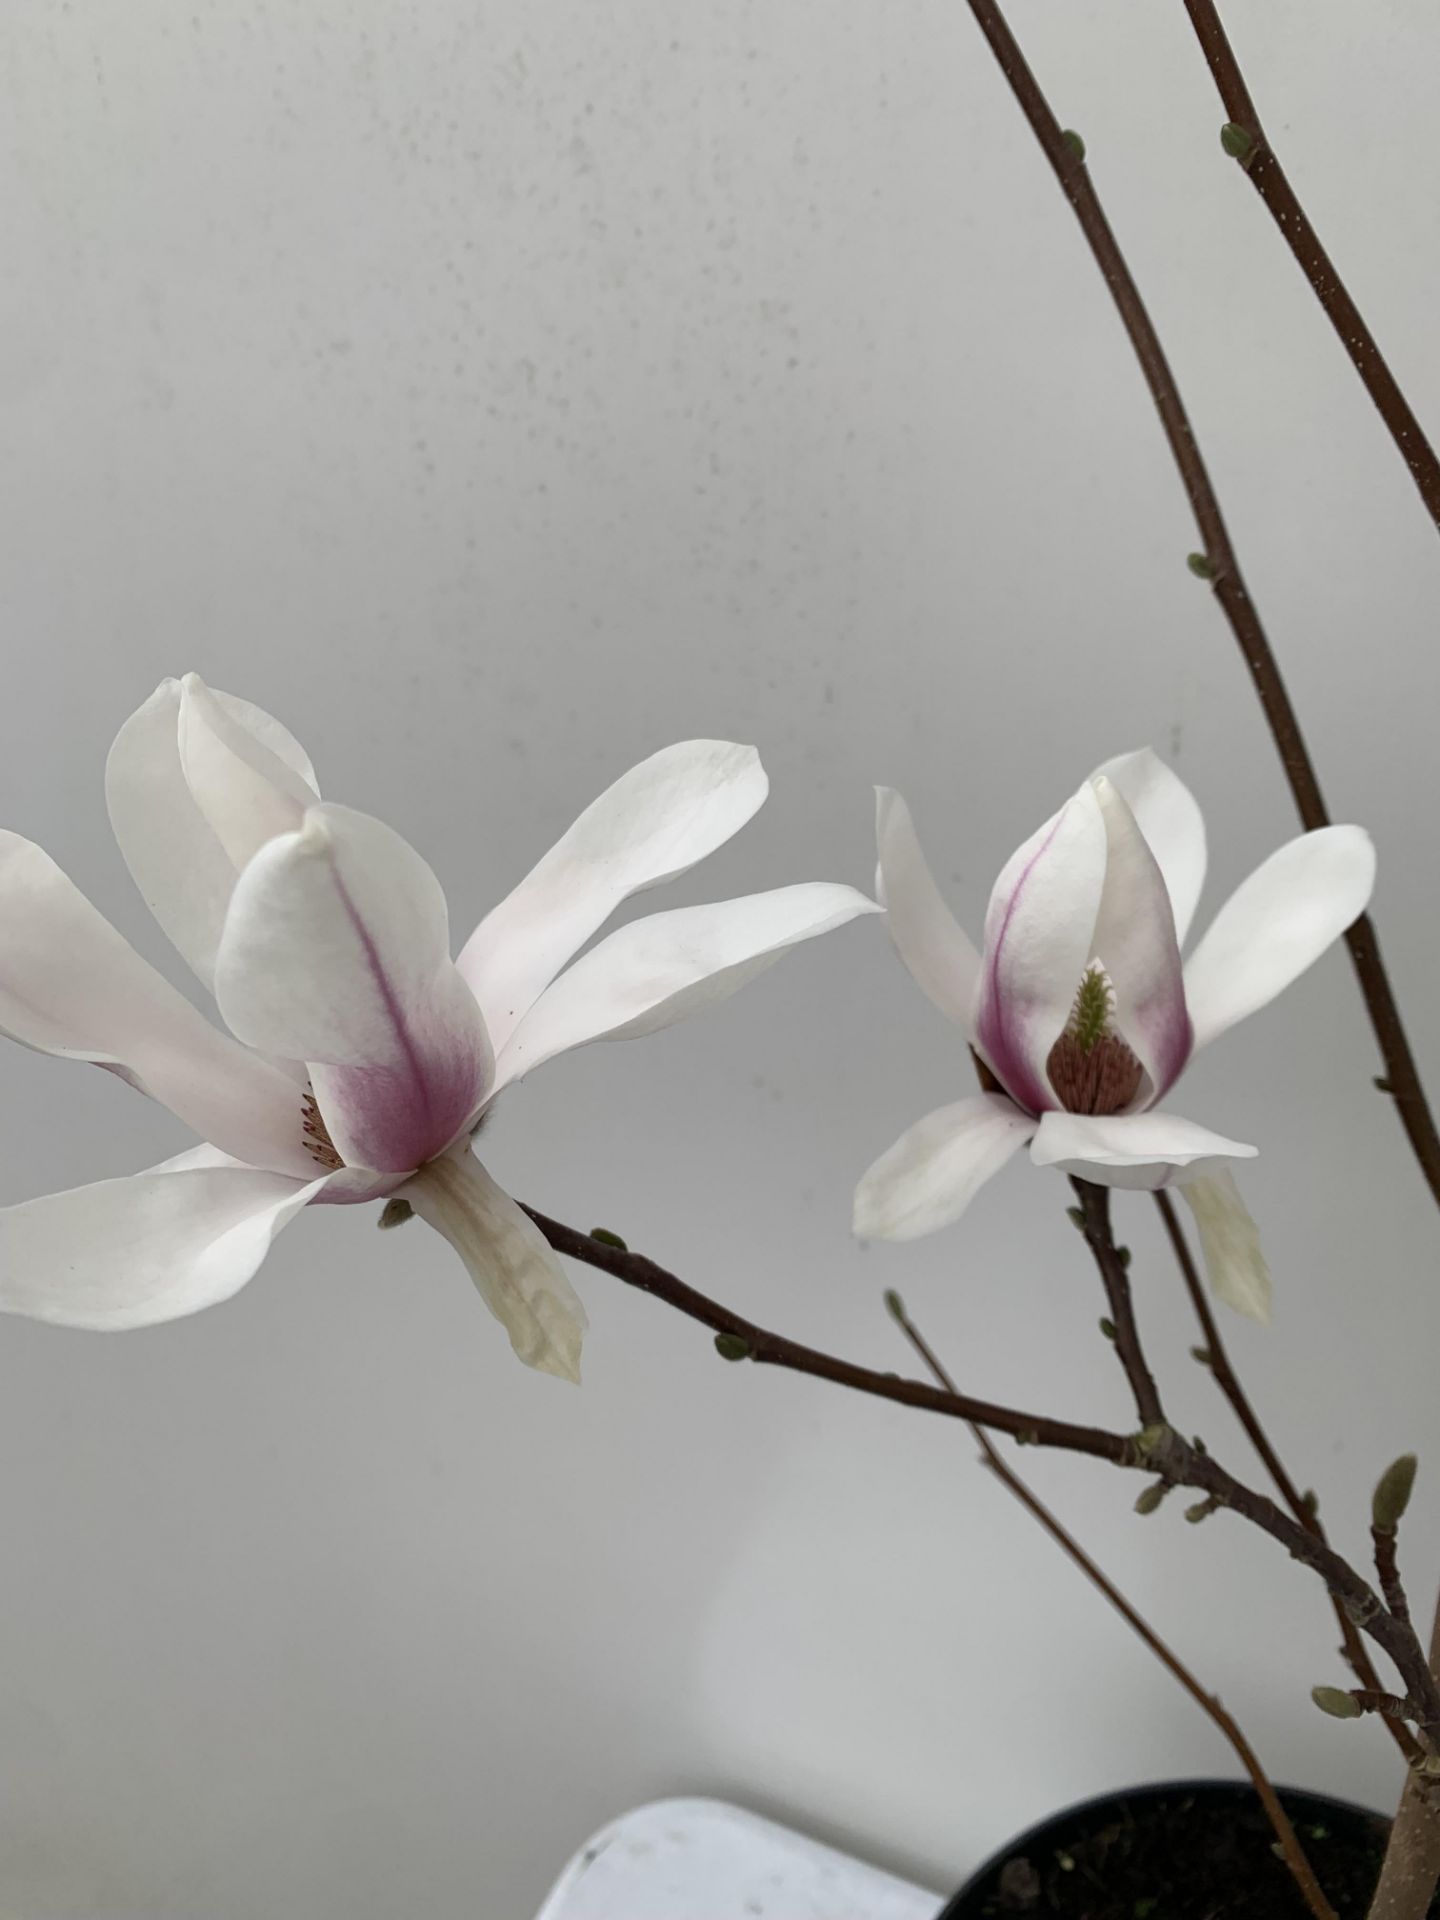 ONE MAGNOLIA SOULANGEANA 'SUPERBA' APPROX 120CM IN HEIGHT IN A 7 LTR POT PLUS VAT - Image 13 of 14